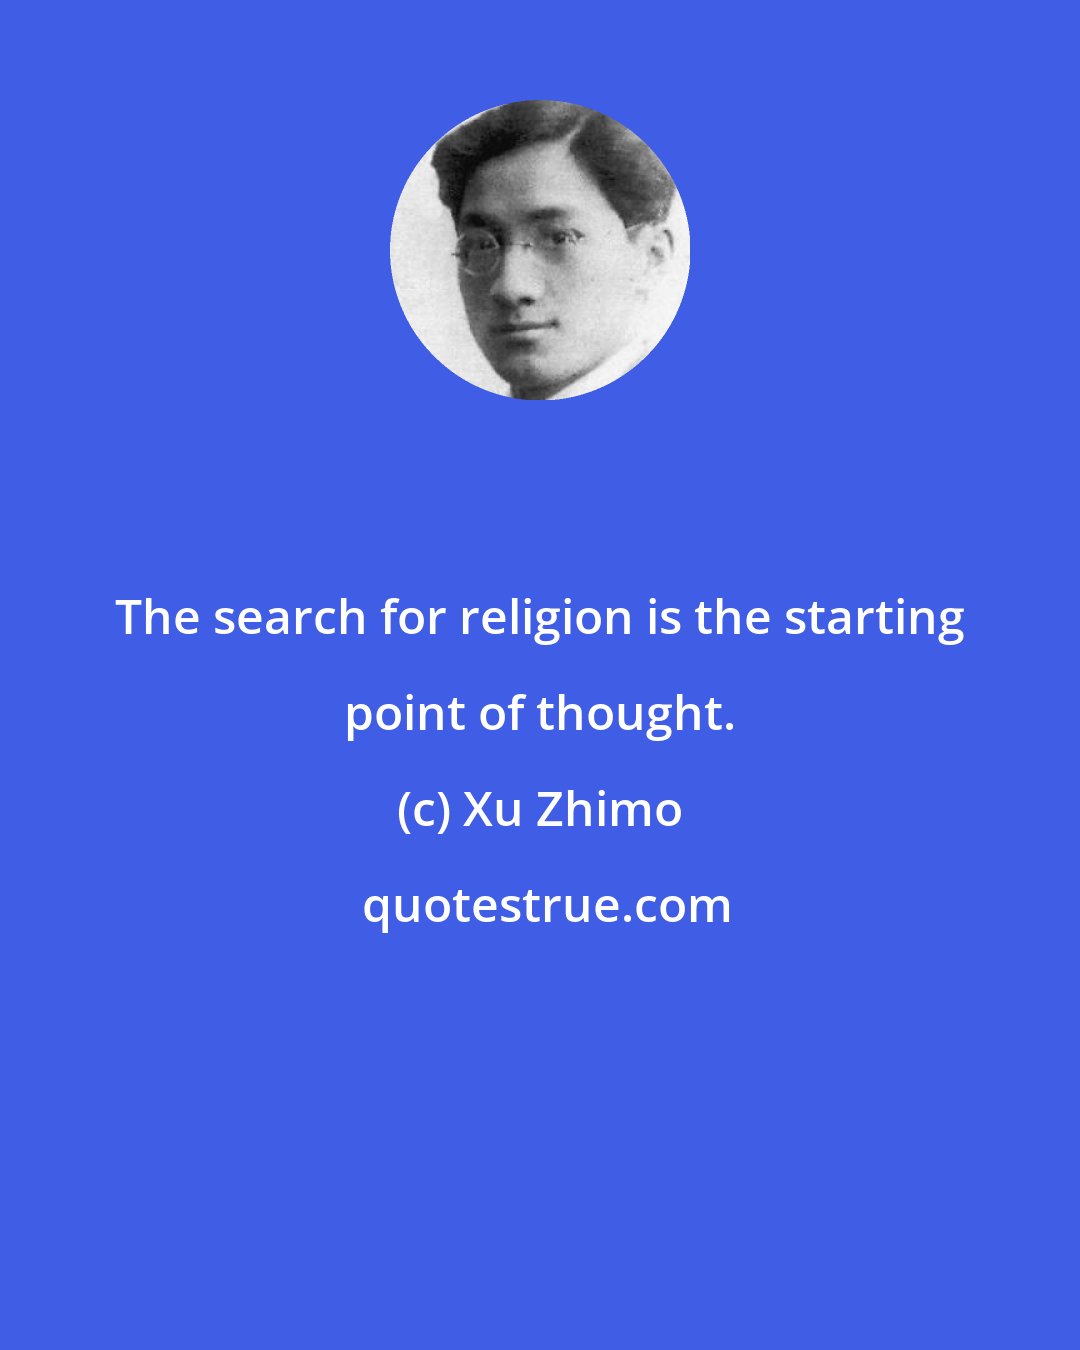 Xu Zhimo: The search for religion is the starting point of thought.